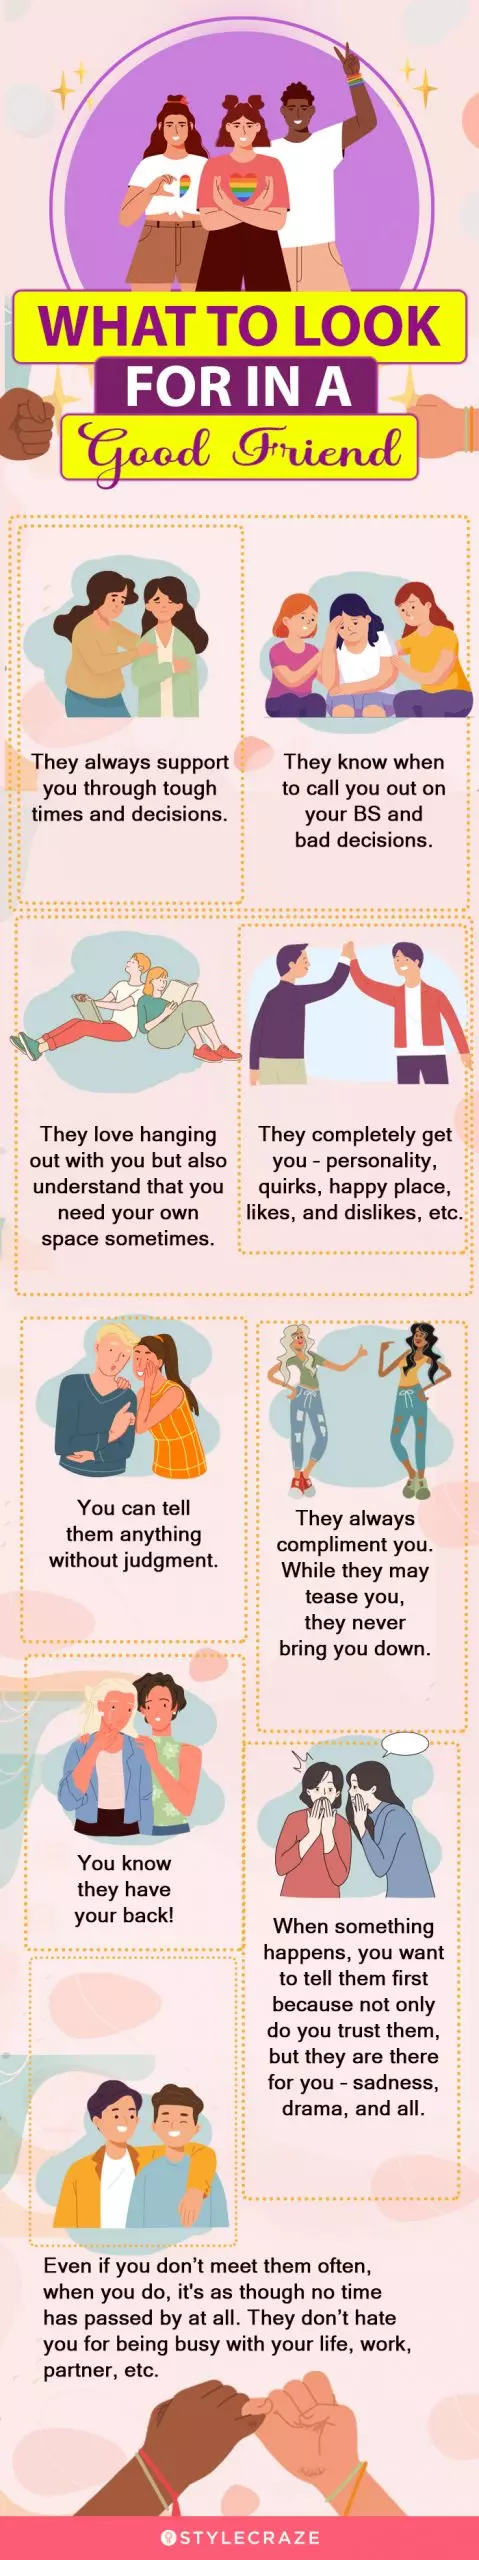 what to look for in a good friend (infographic)